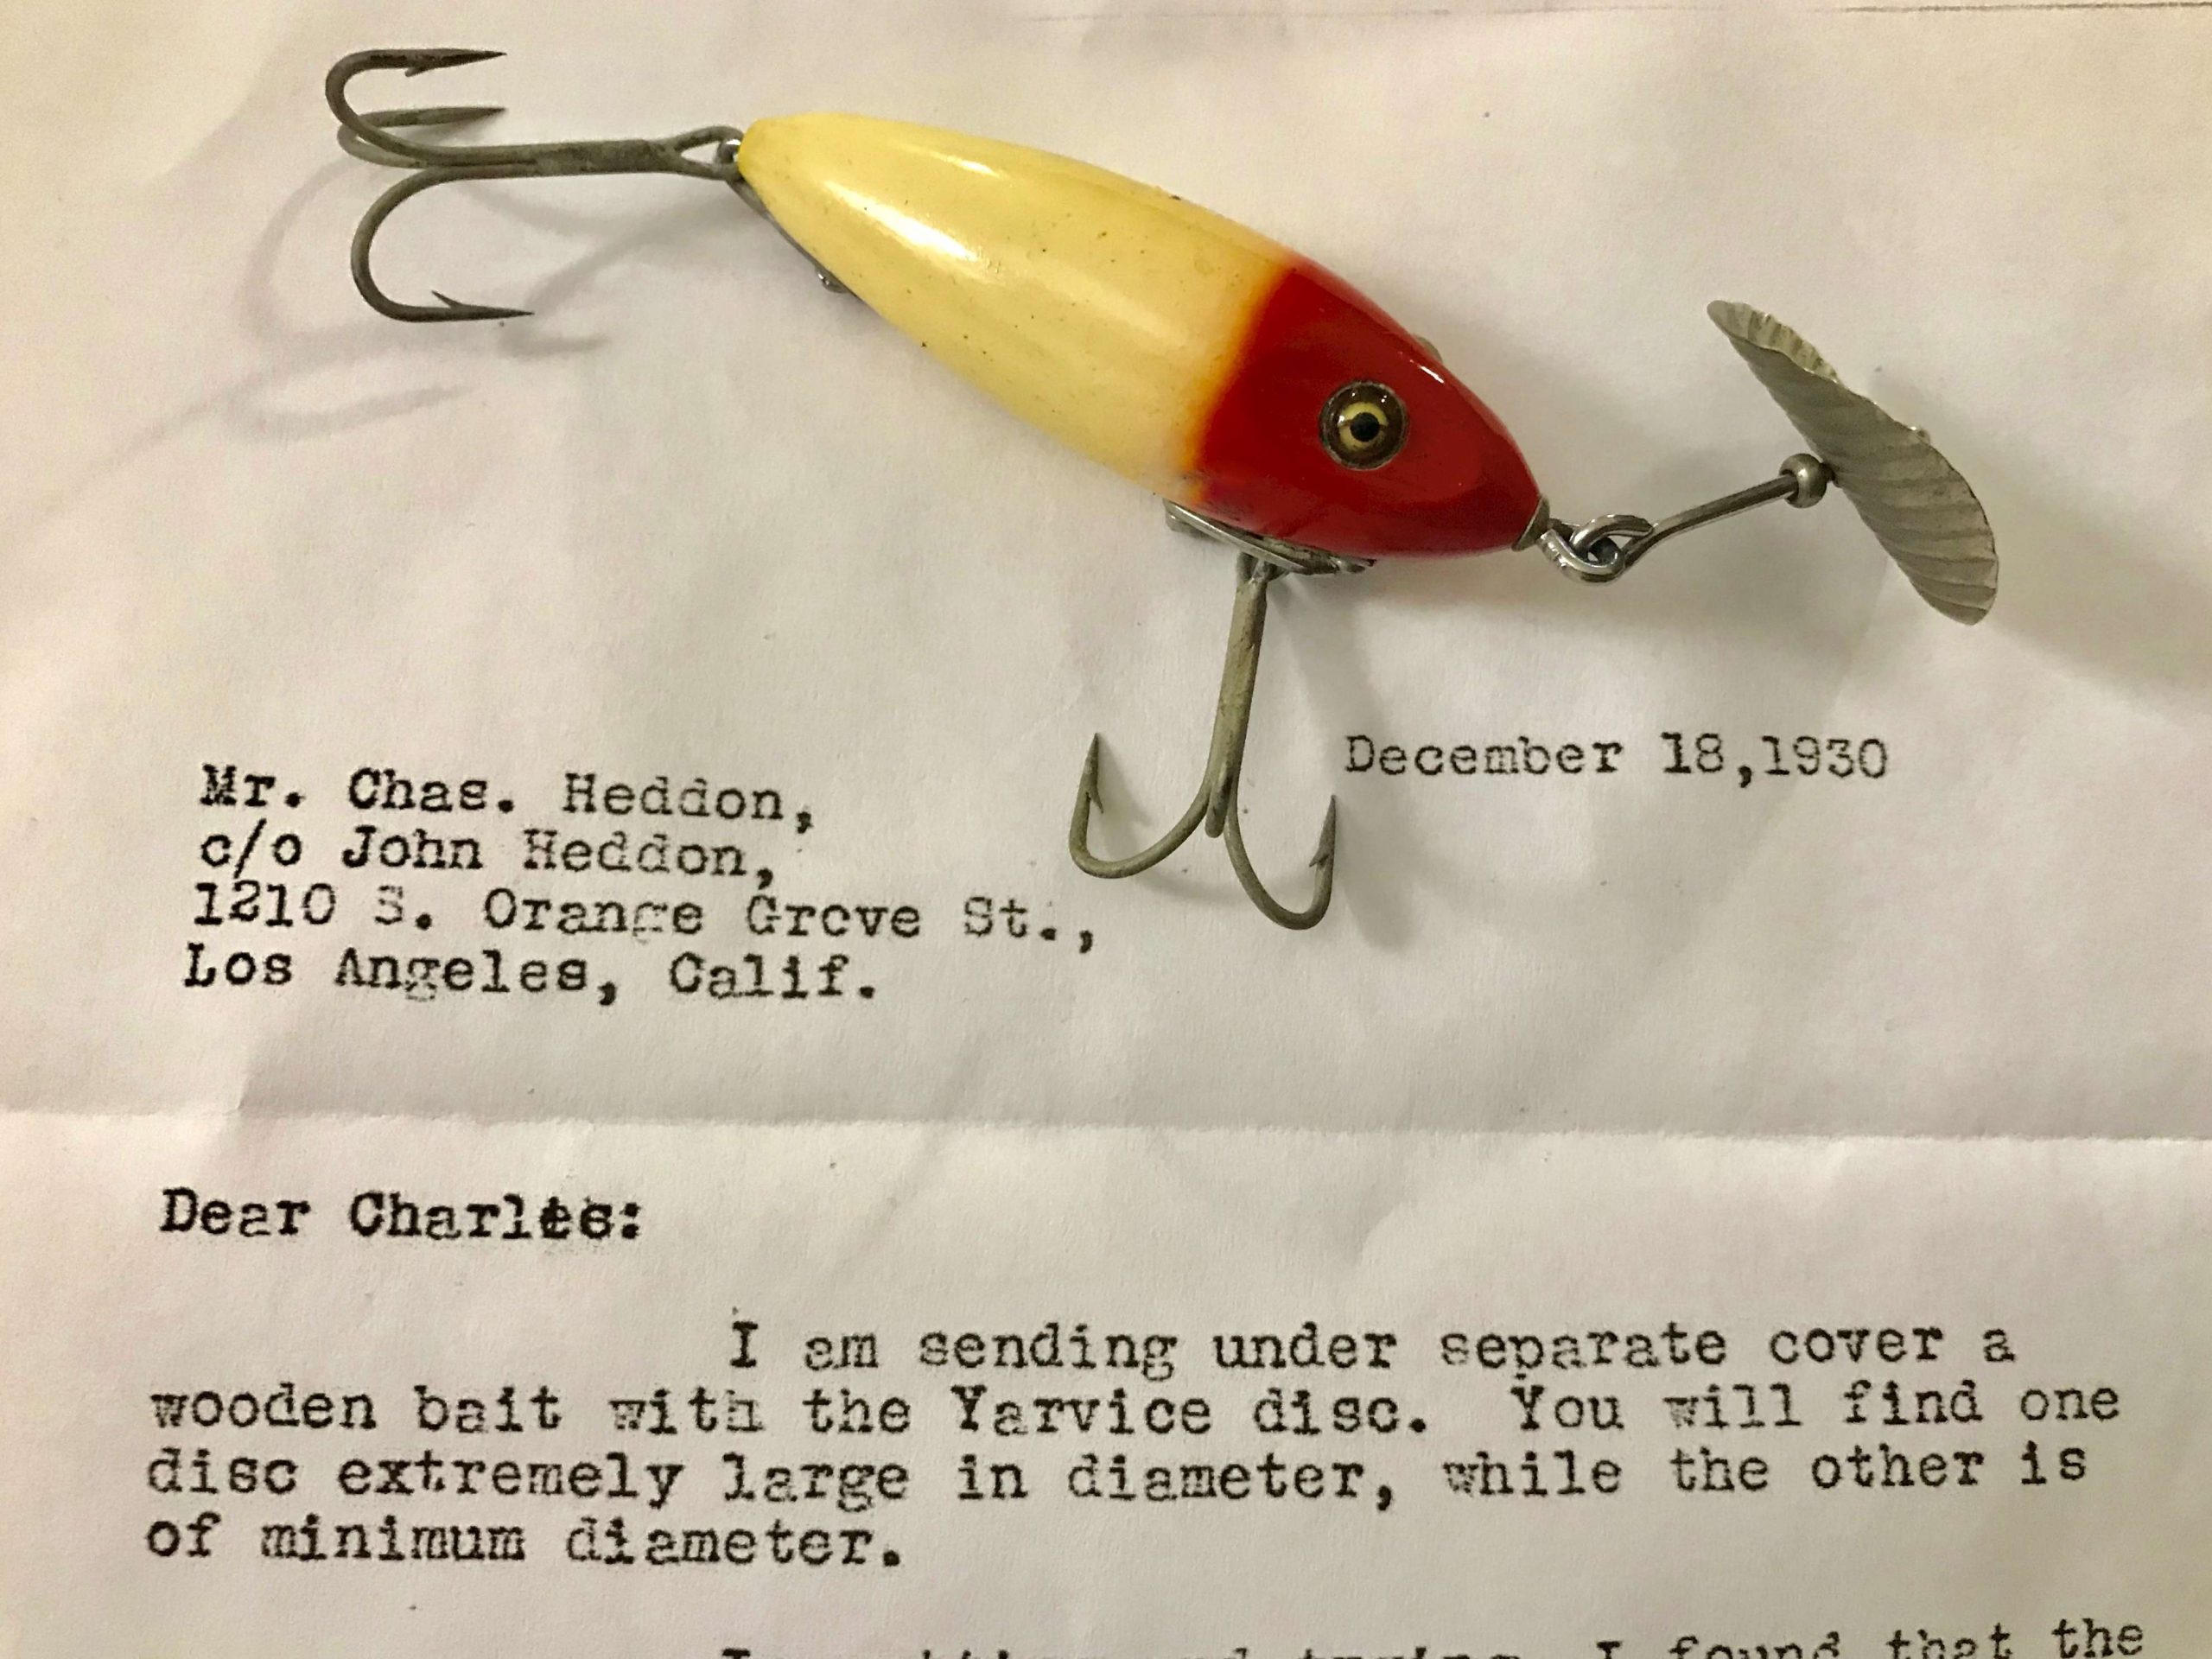 https://www.bassmaster.com/wp-content/uploads/2019/06/yarvice_blade_bait_letter_from_william_stoley-1-scaled.jpg